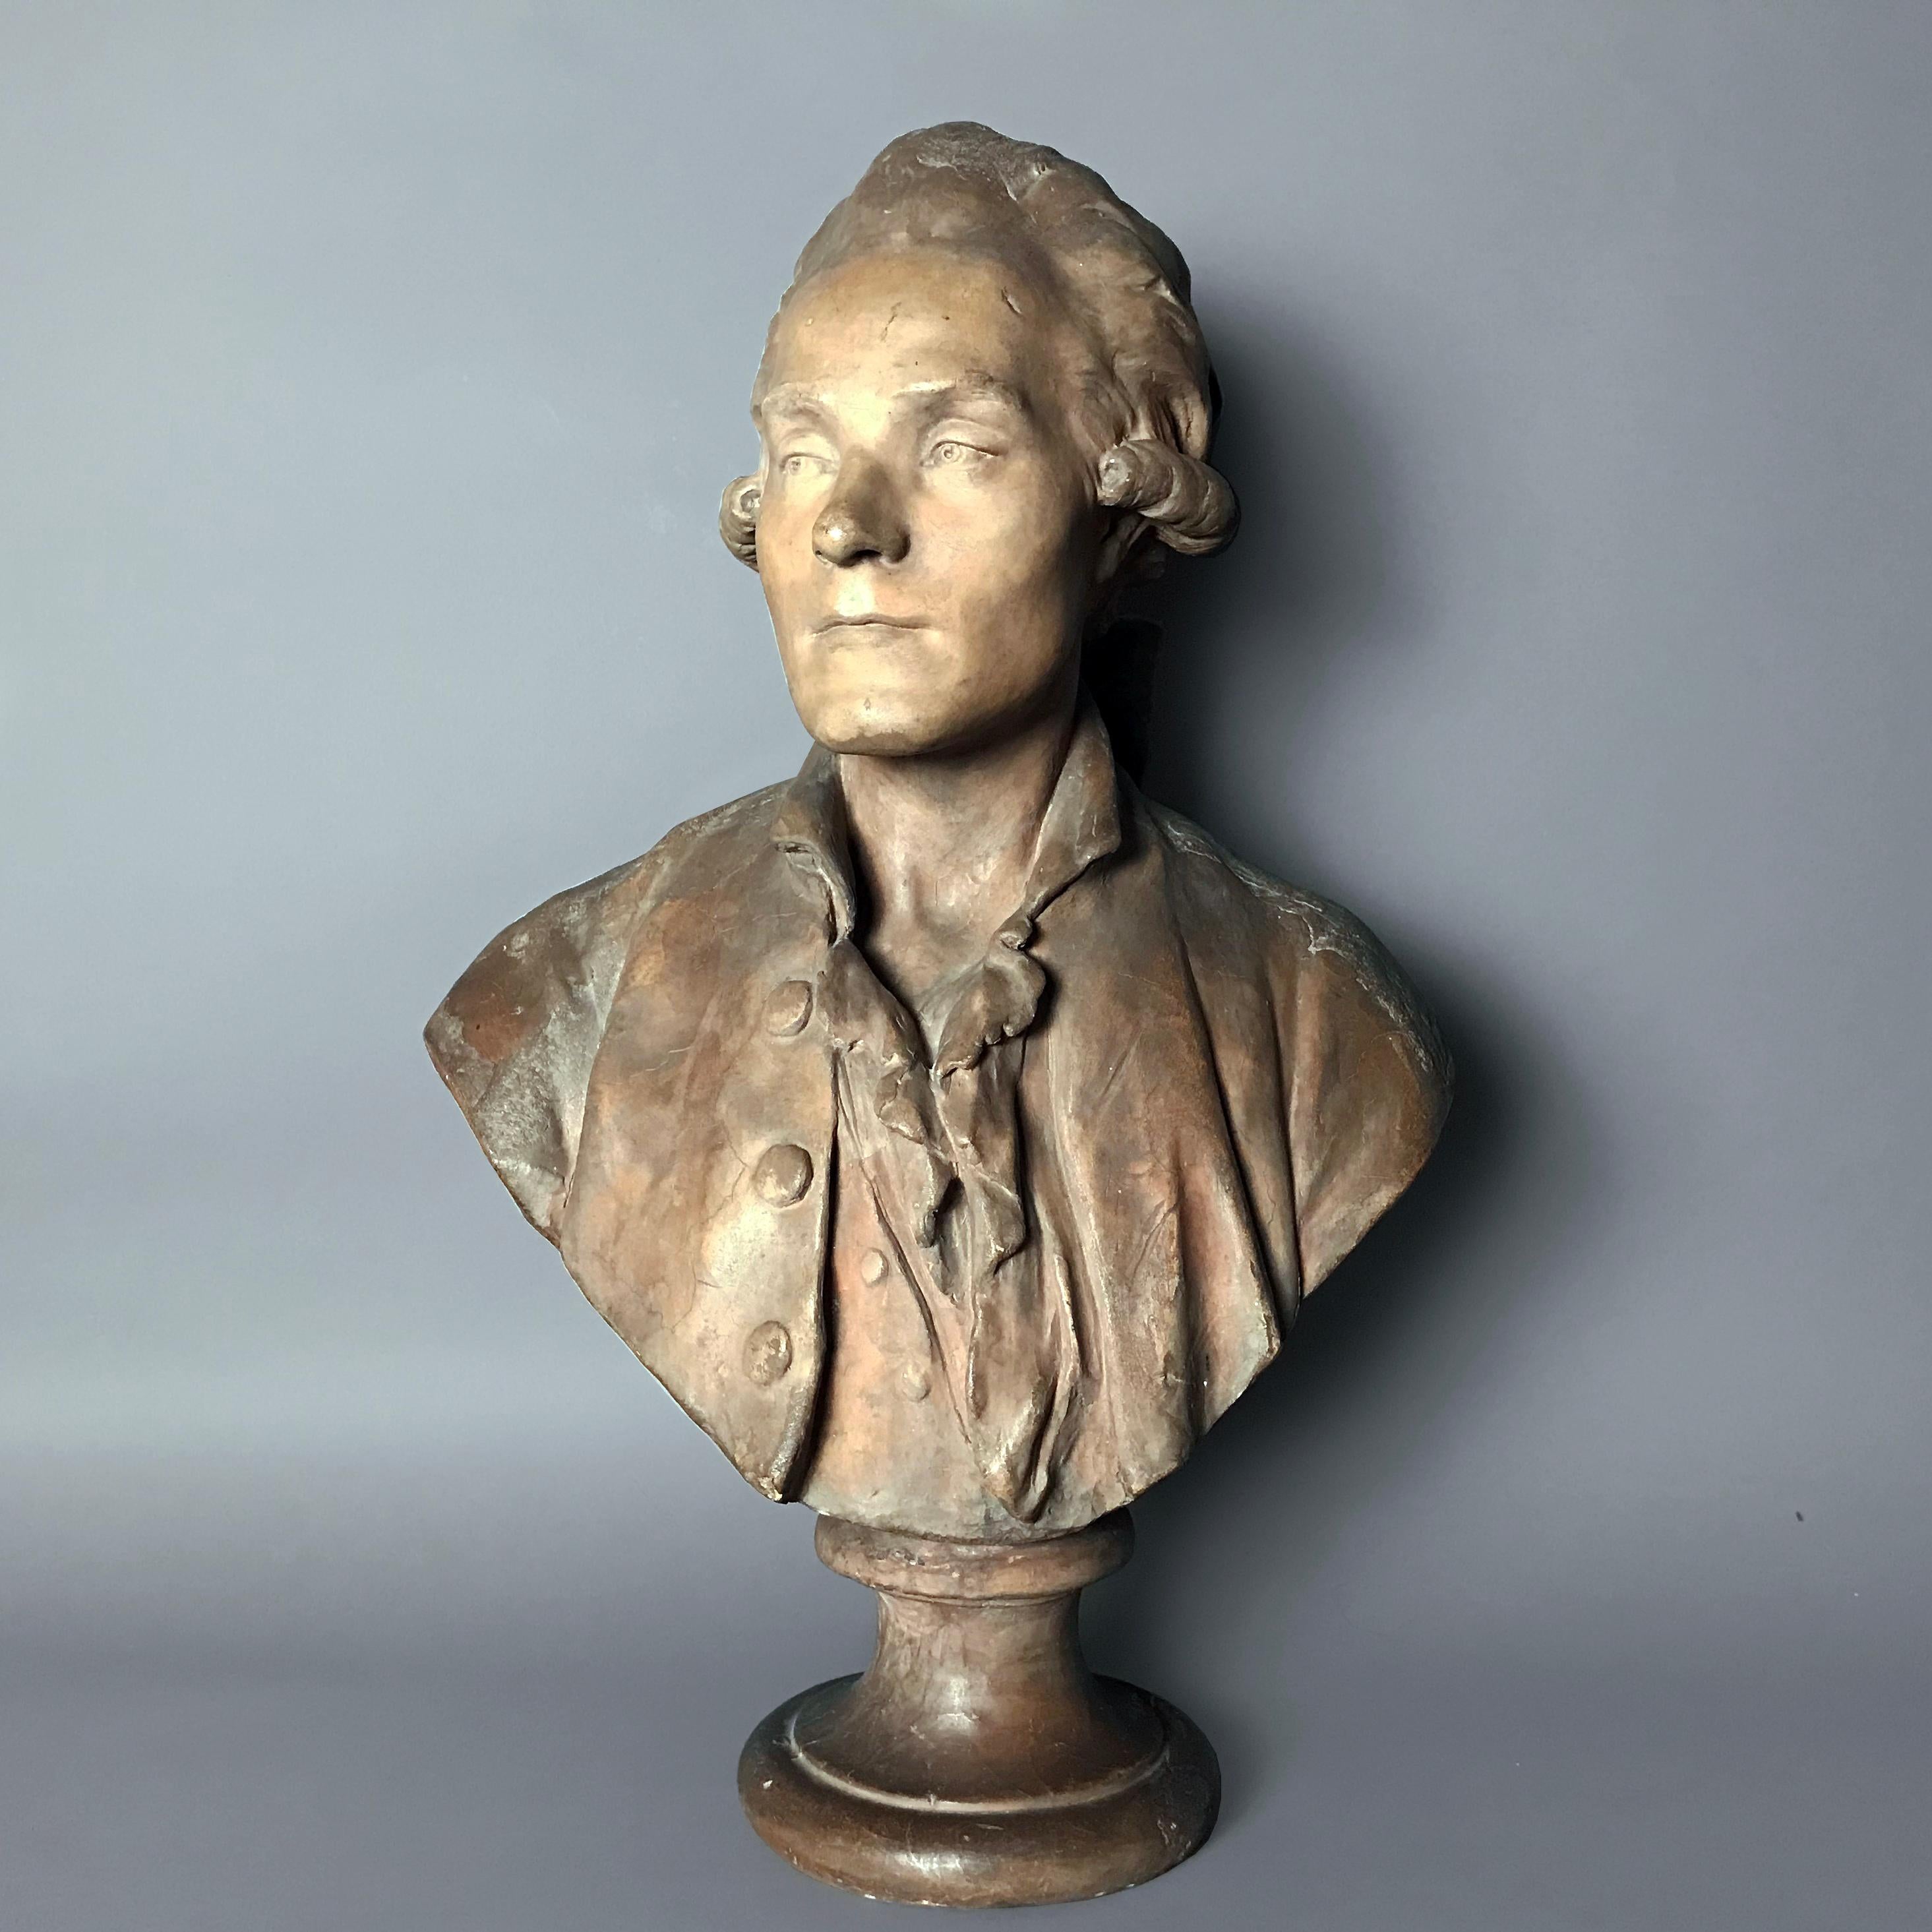 After a model attributed to Jean Antoine Houdon, possibly Nicolas Joseph Laurent Gilbert (1750 - 1780), poet.

Superbly sculpted in a coat and ruffled shirt set on a waisted socle. The rear of the bust showing the sculptor's thumb-prints where he